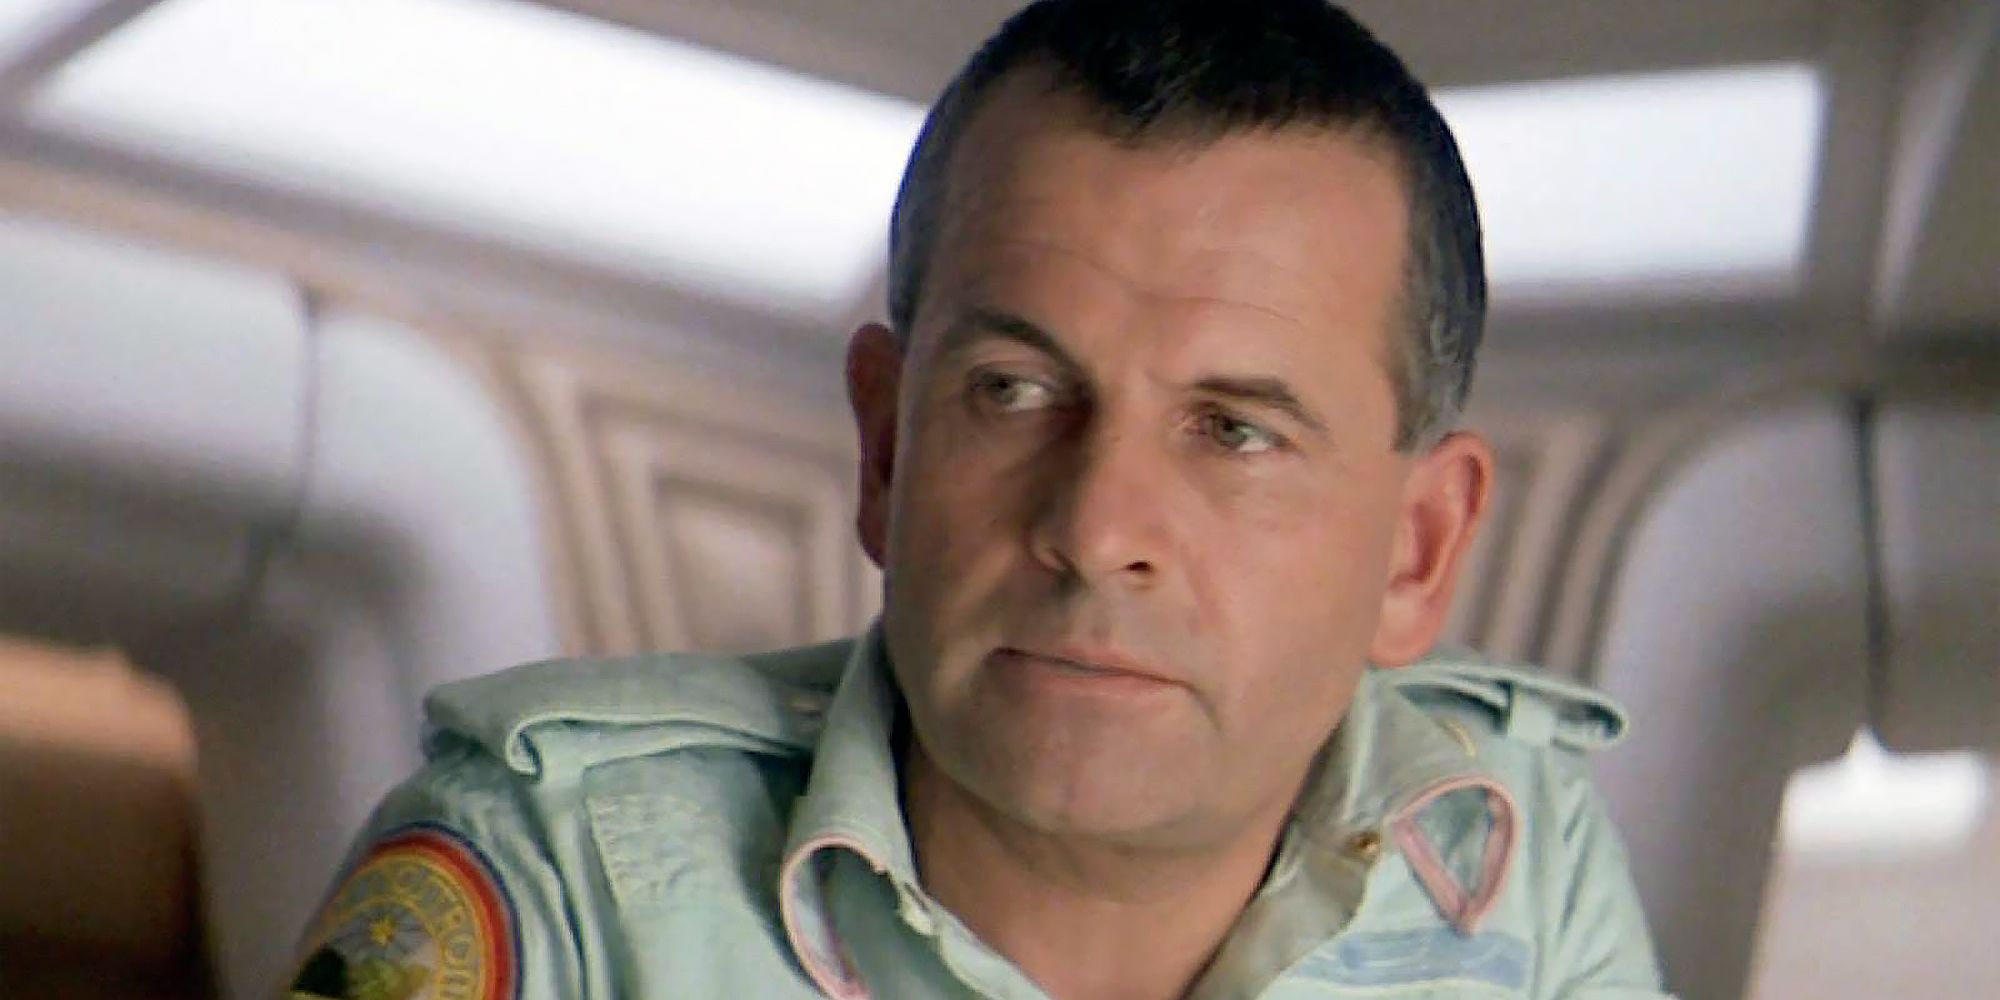 The addition to 'Alien' of the character of Ash (Ian Holm) became central to the Alien franchise